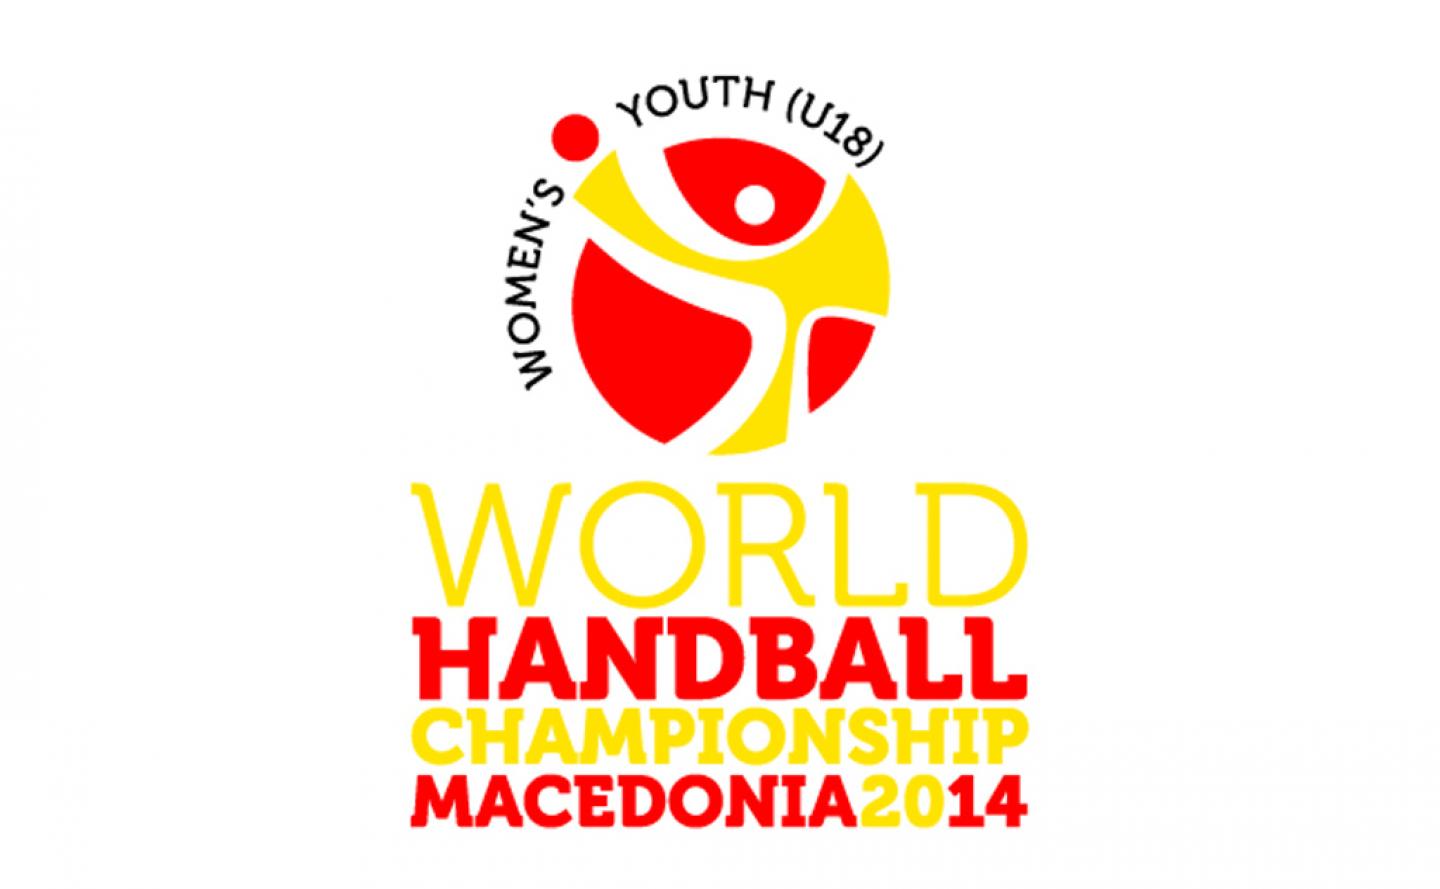 Draw event in FYR Macedonia is scheduled